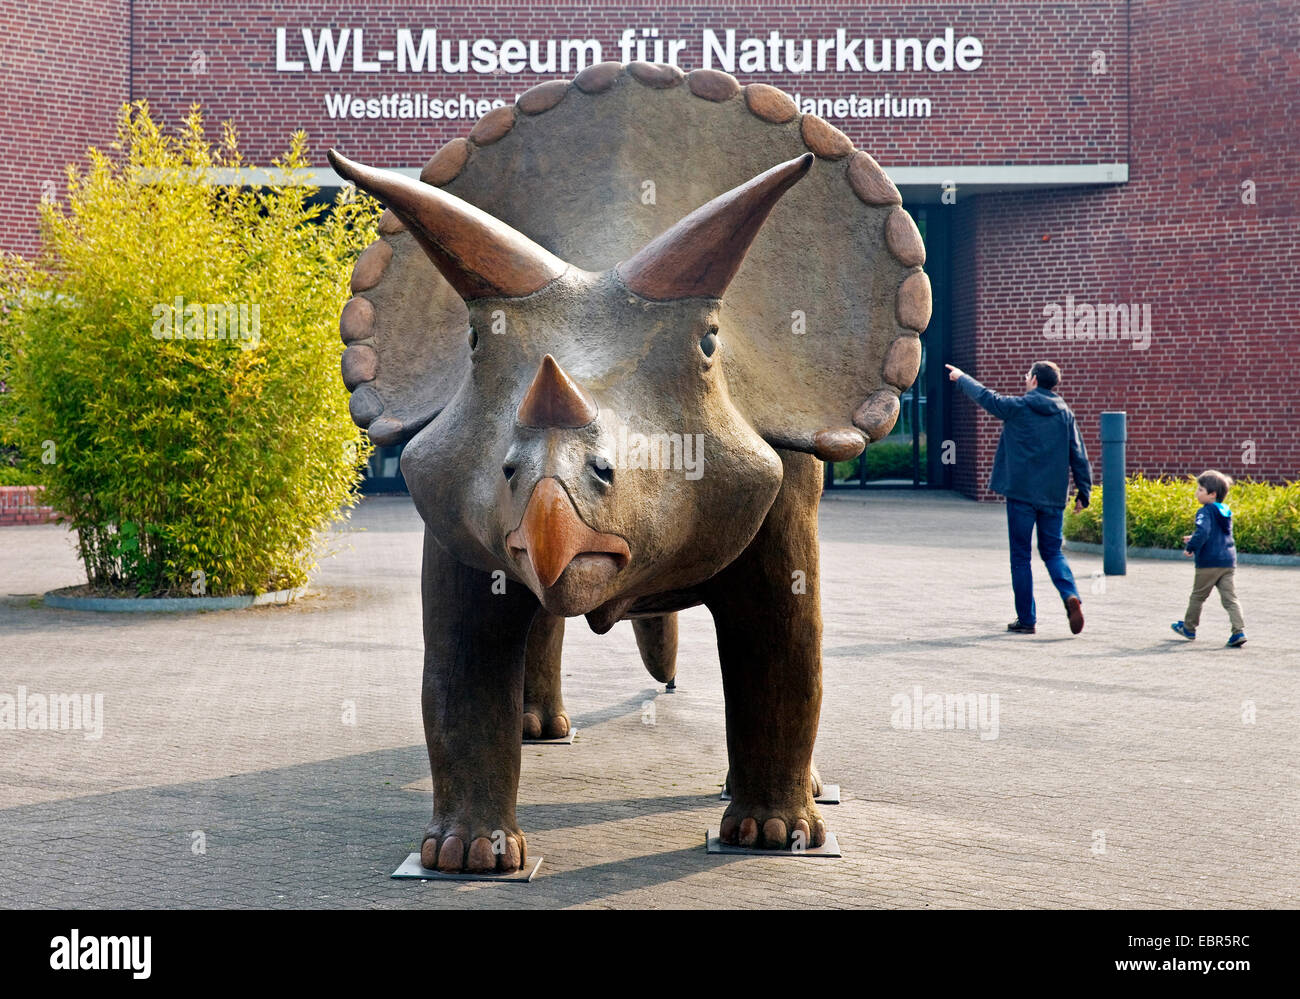 model of a dinasaur in front of museum of natural history, Germany, North Rhine-Westphalia, Muenster Stock Photo